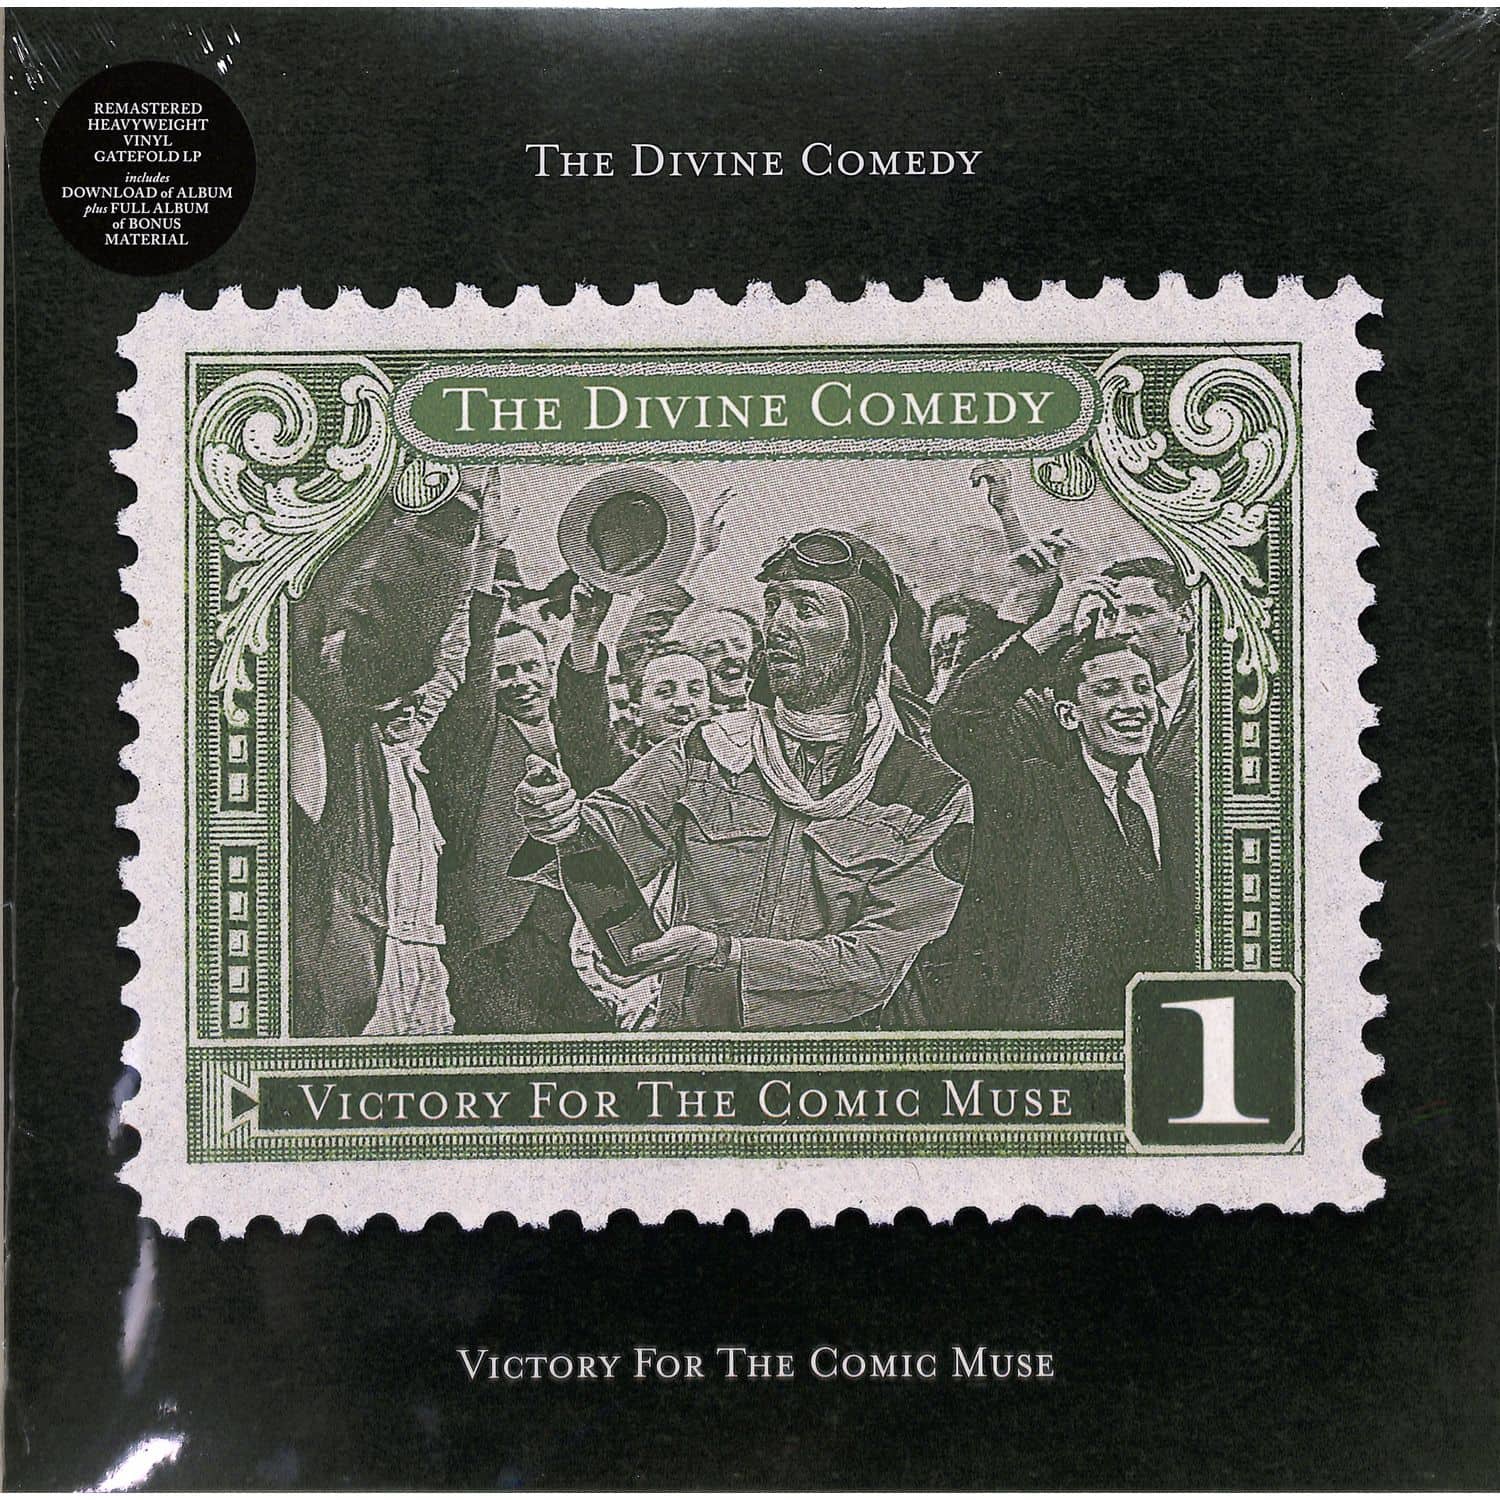 The Divine Comedy - VICTORY FOR THE COMIC MUSE 